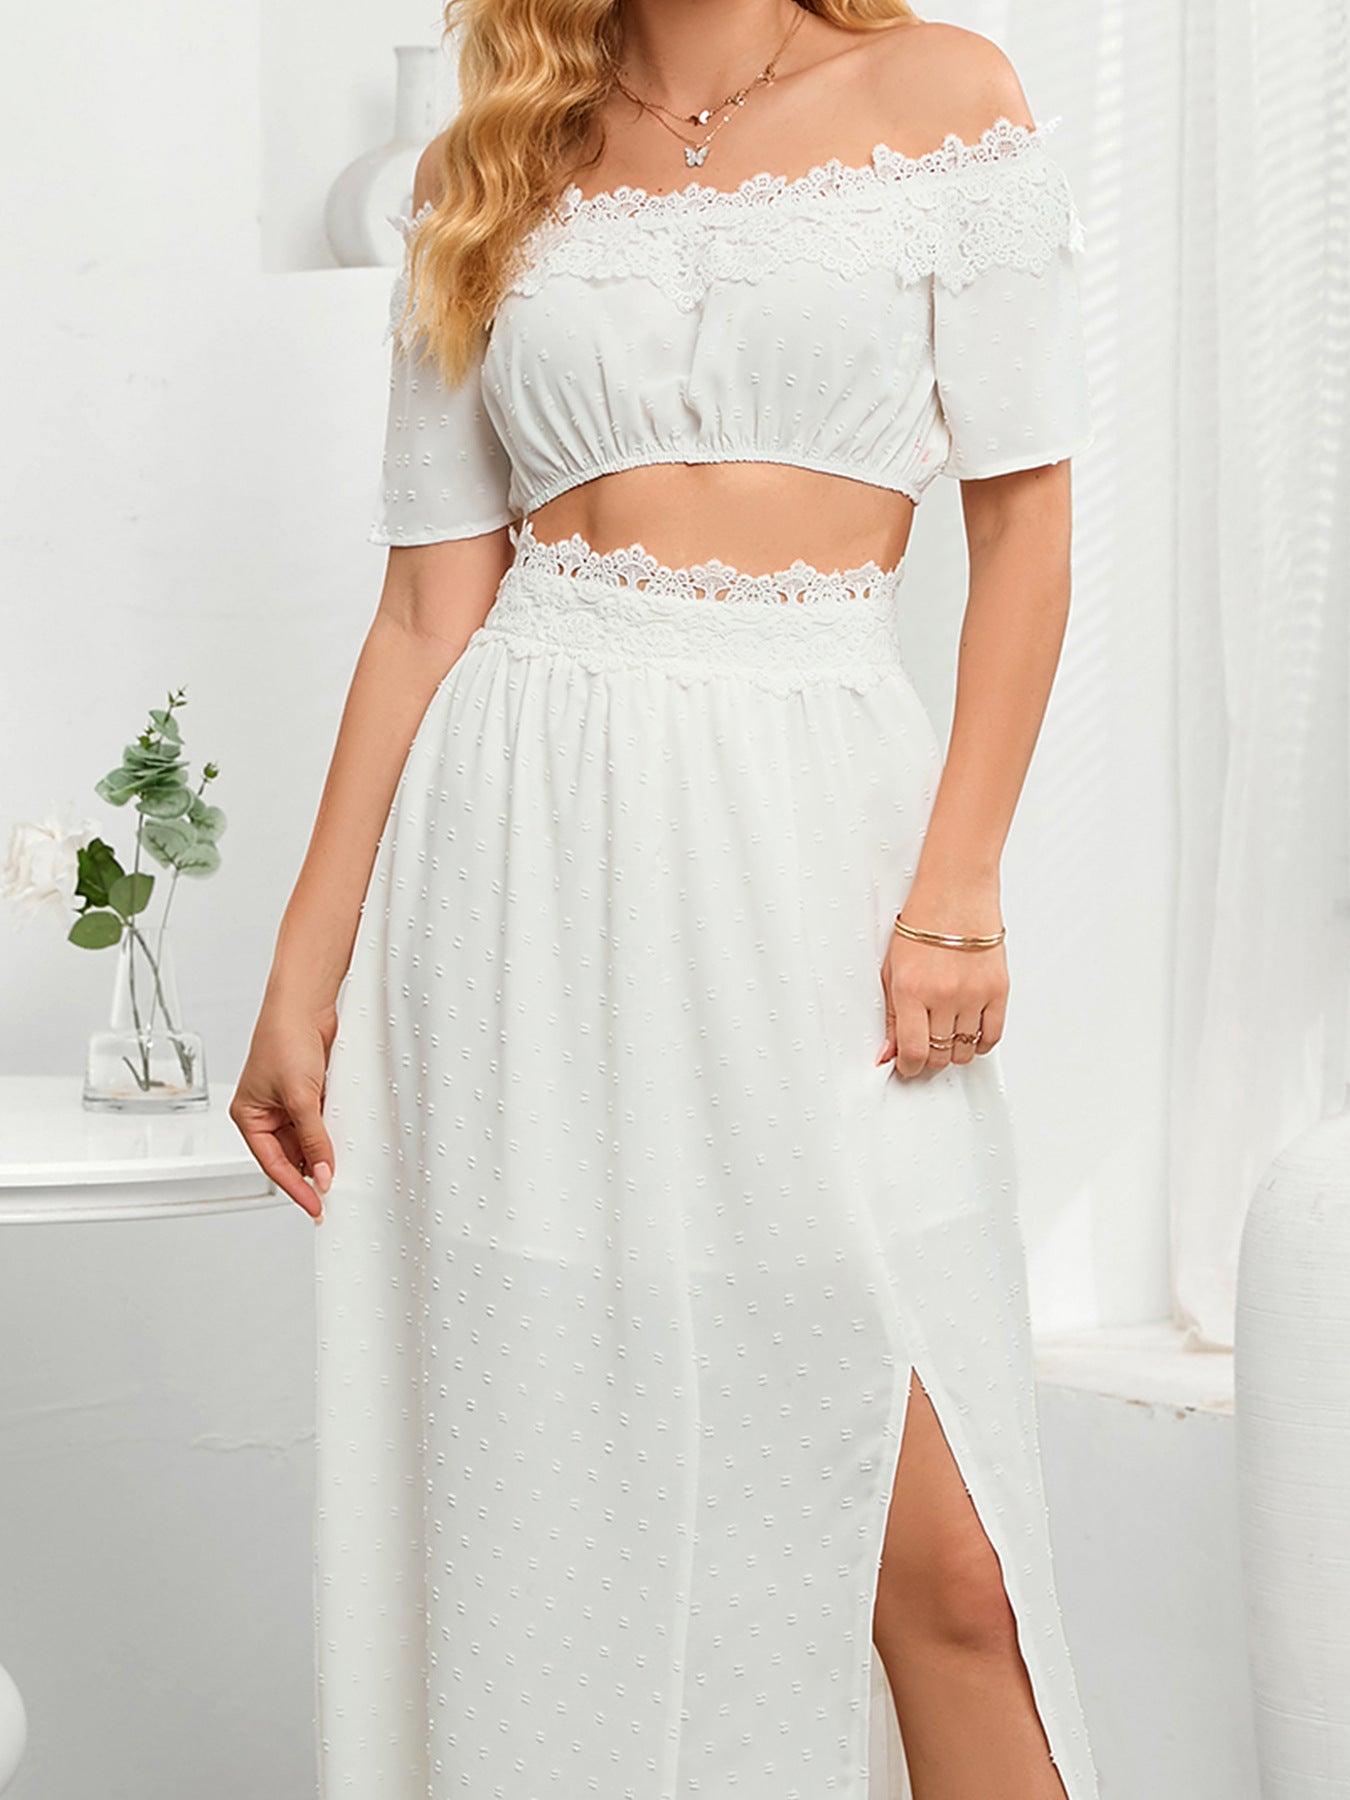 Swiss Dot Lace Trim Cropped Top and Slit Skirt Set Posh Styles Apparel